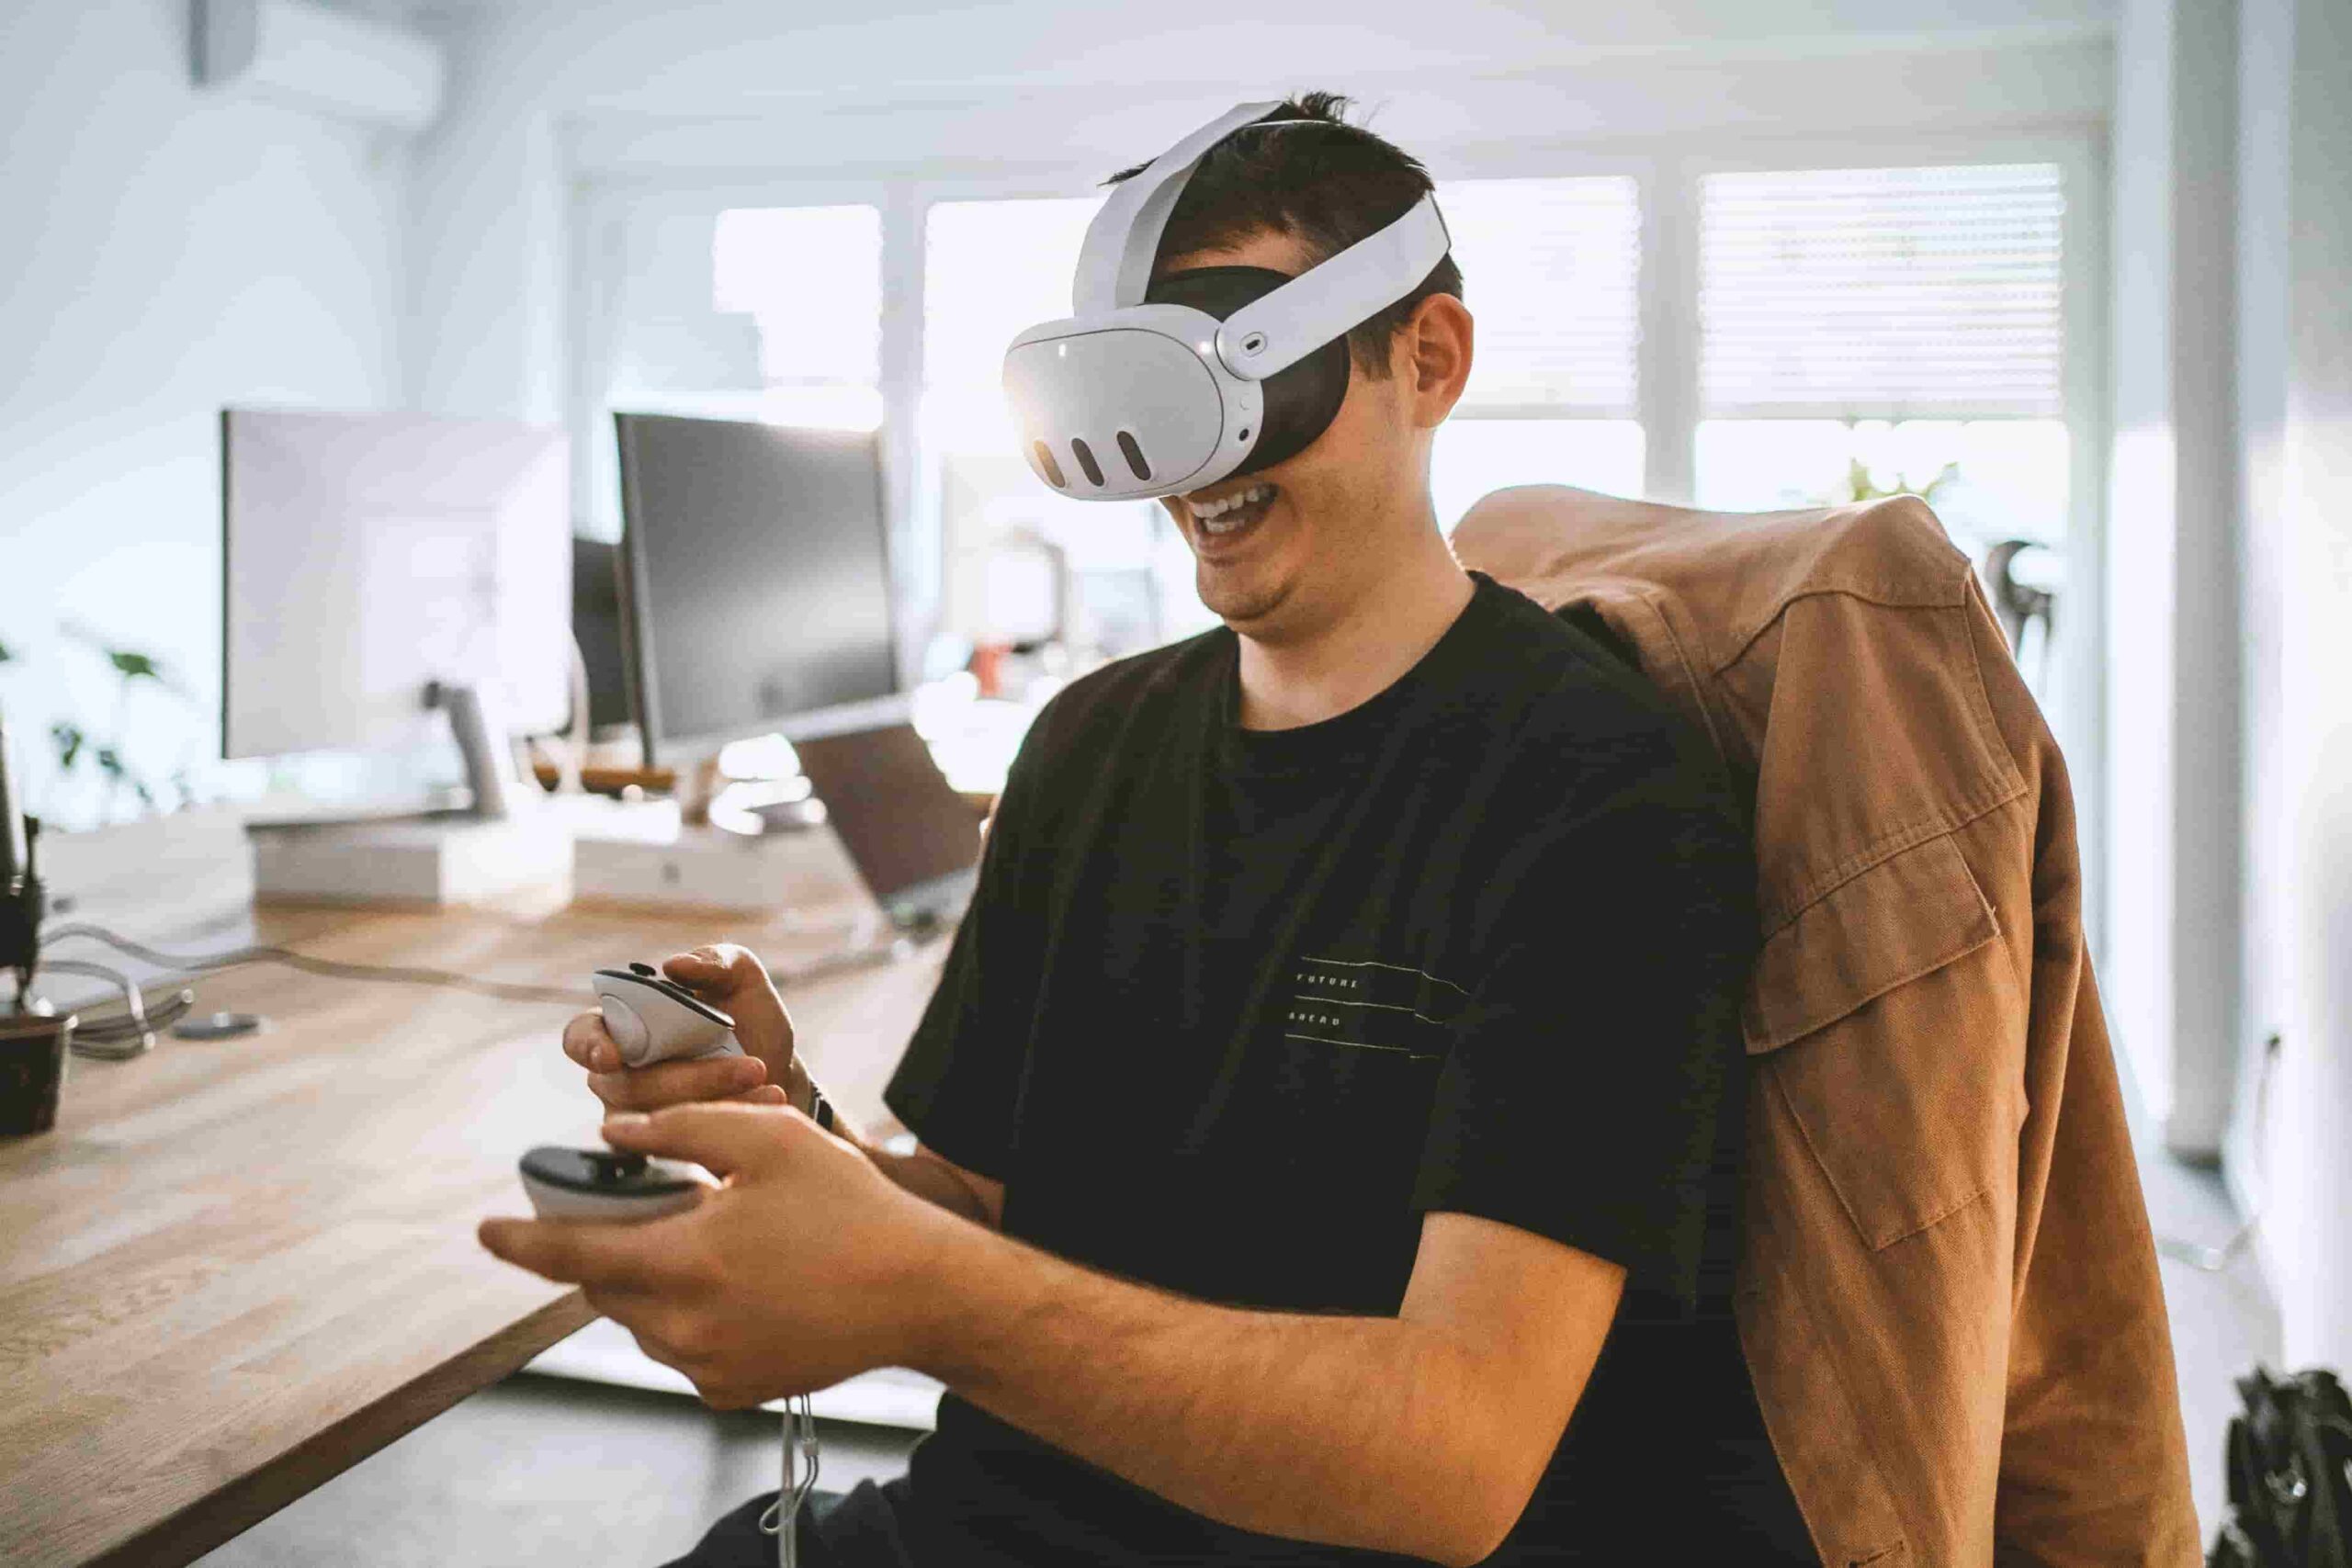 Beyond Gaming The World of Augmented Reality (AR) and Virtual Reality (VR)